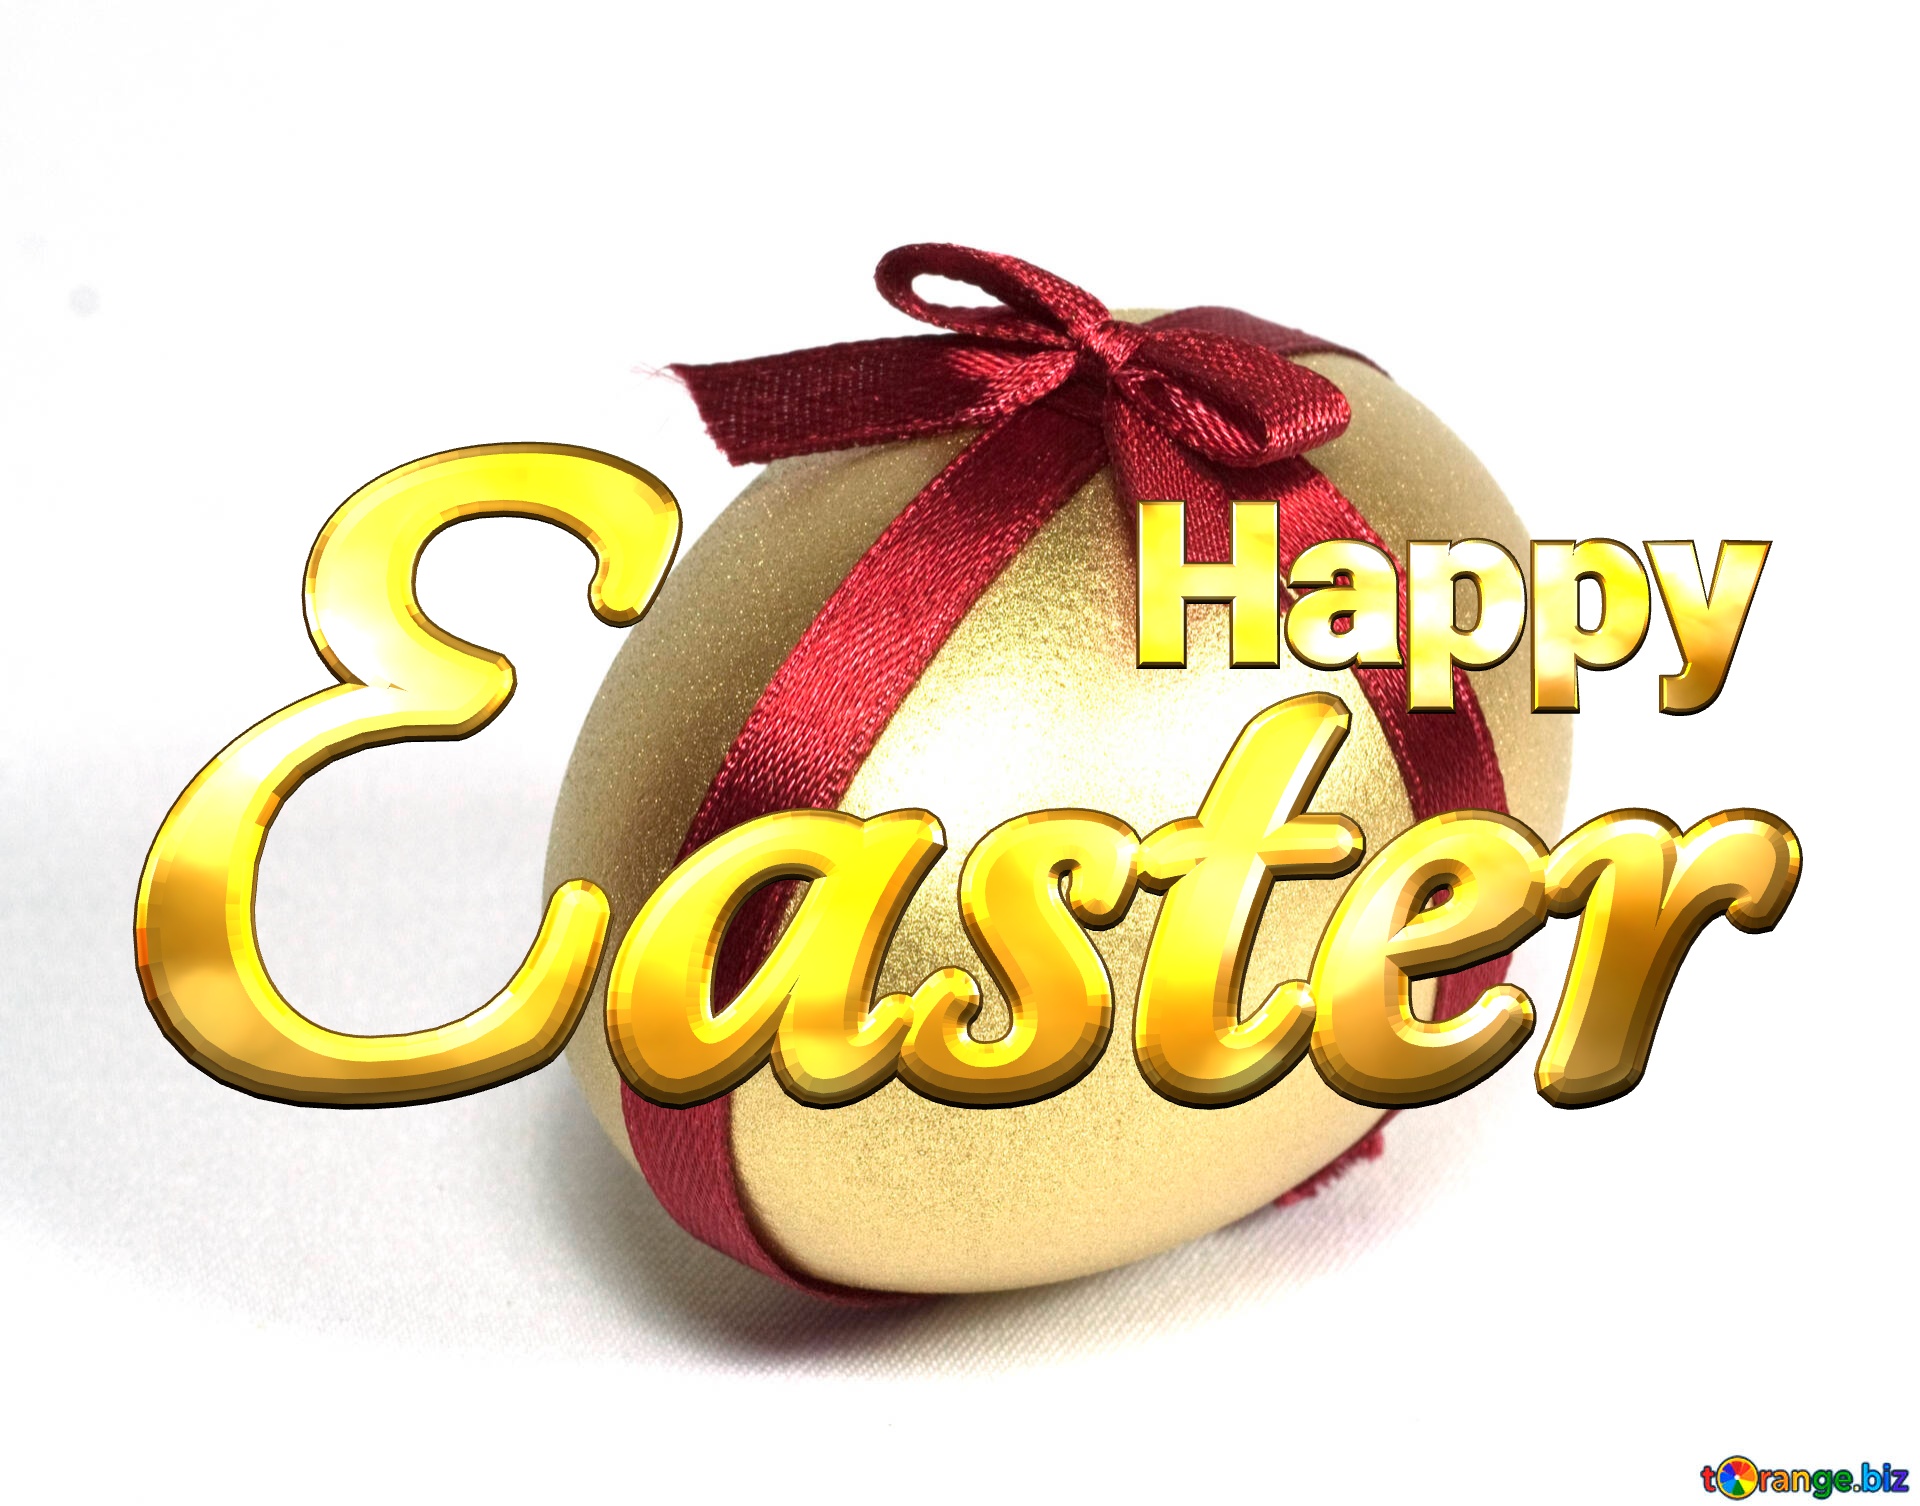 Happy Easter  Egg  of the  Gold   ribbon №8225